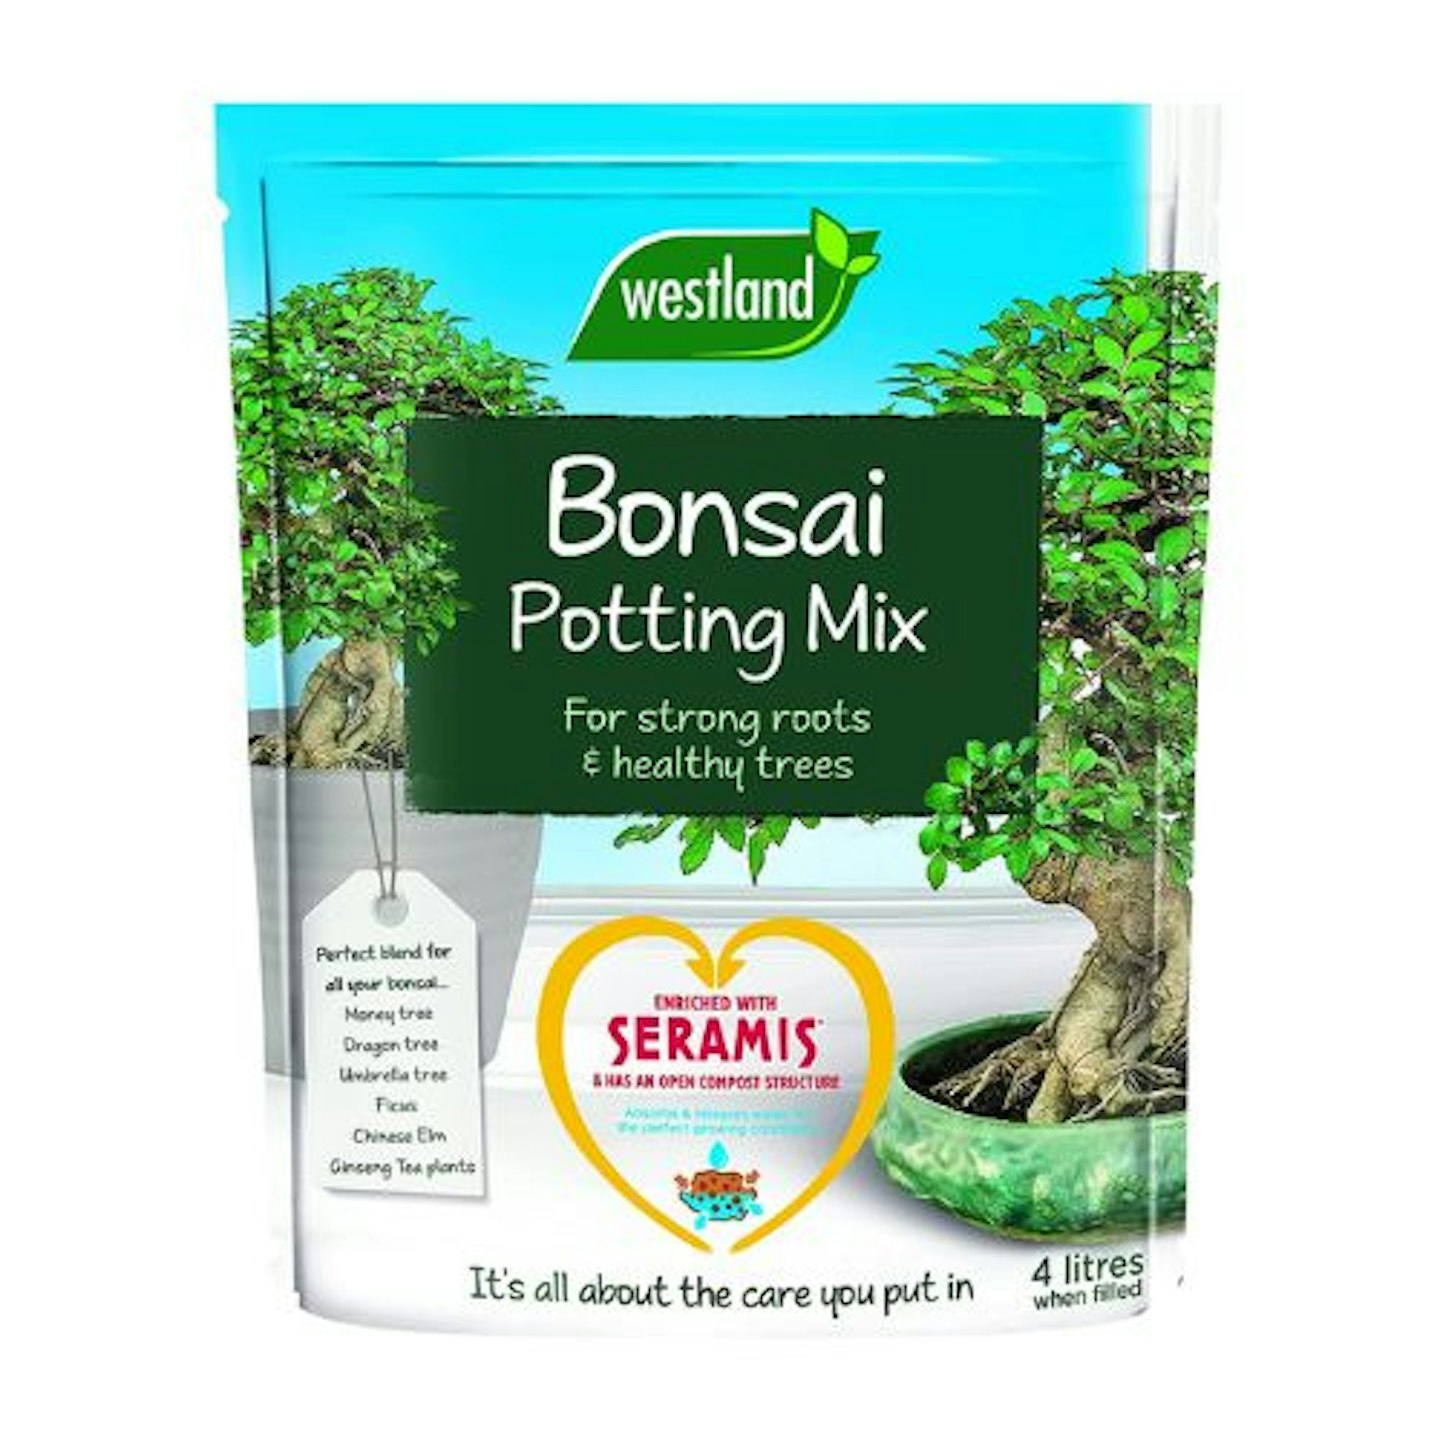 Westland 10200055 Bonsai Potting Compost Mix and Enriched with Seramis, 4 Litre, Brown